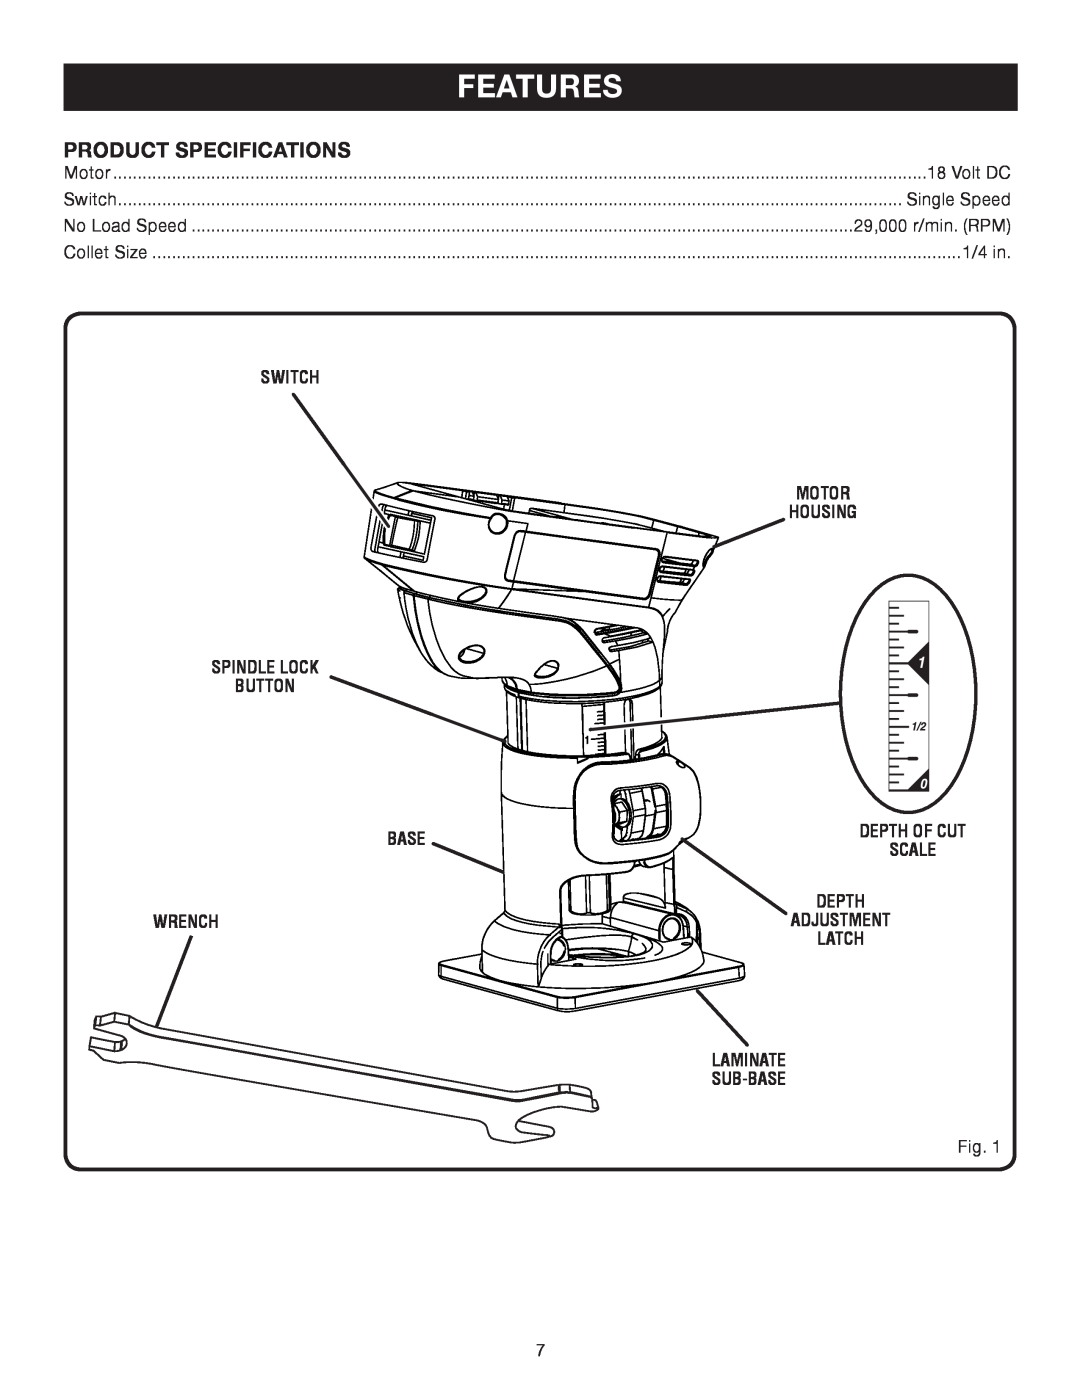 Ryobi P600 manual Features, Product Specifications, Scale, Latch, Motor, Switch, No Load Speed, Collet Size 